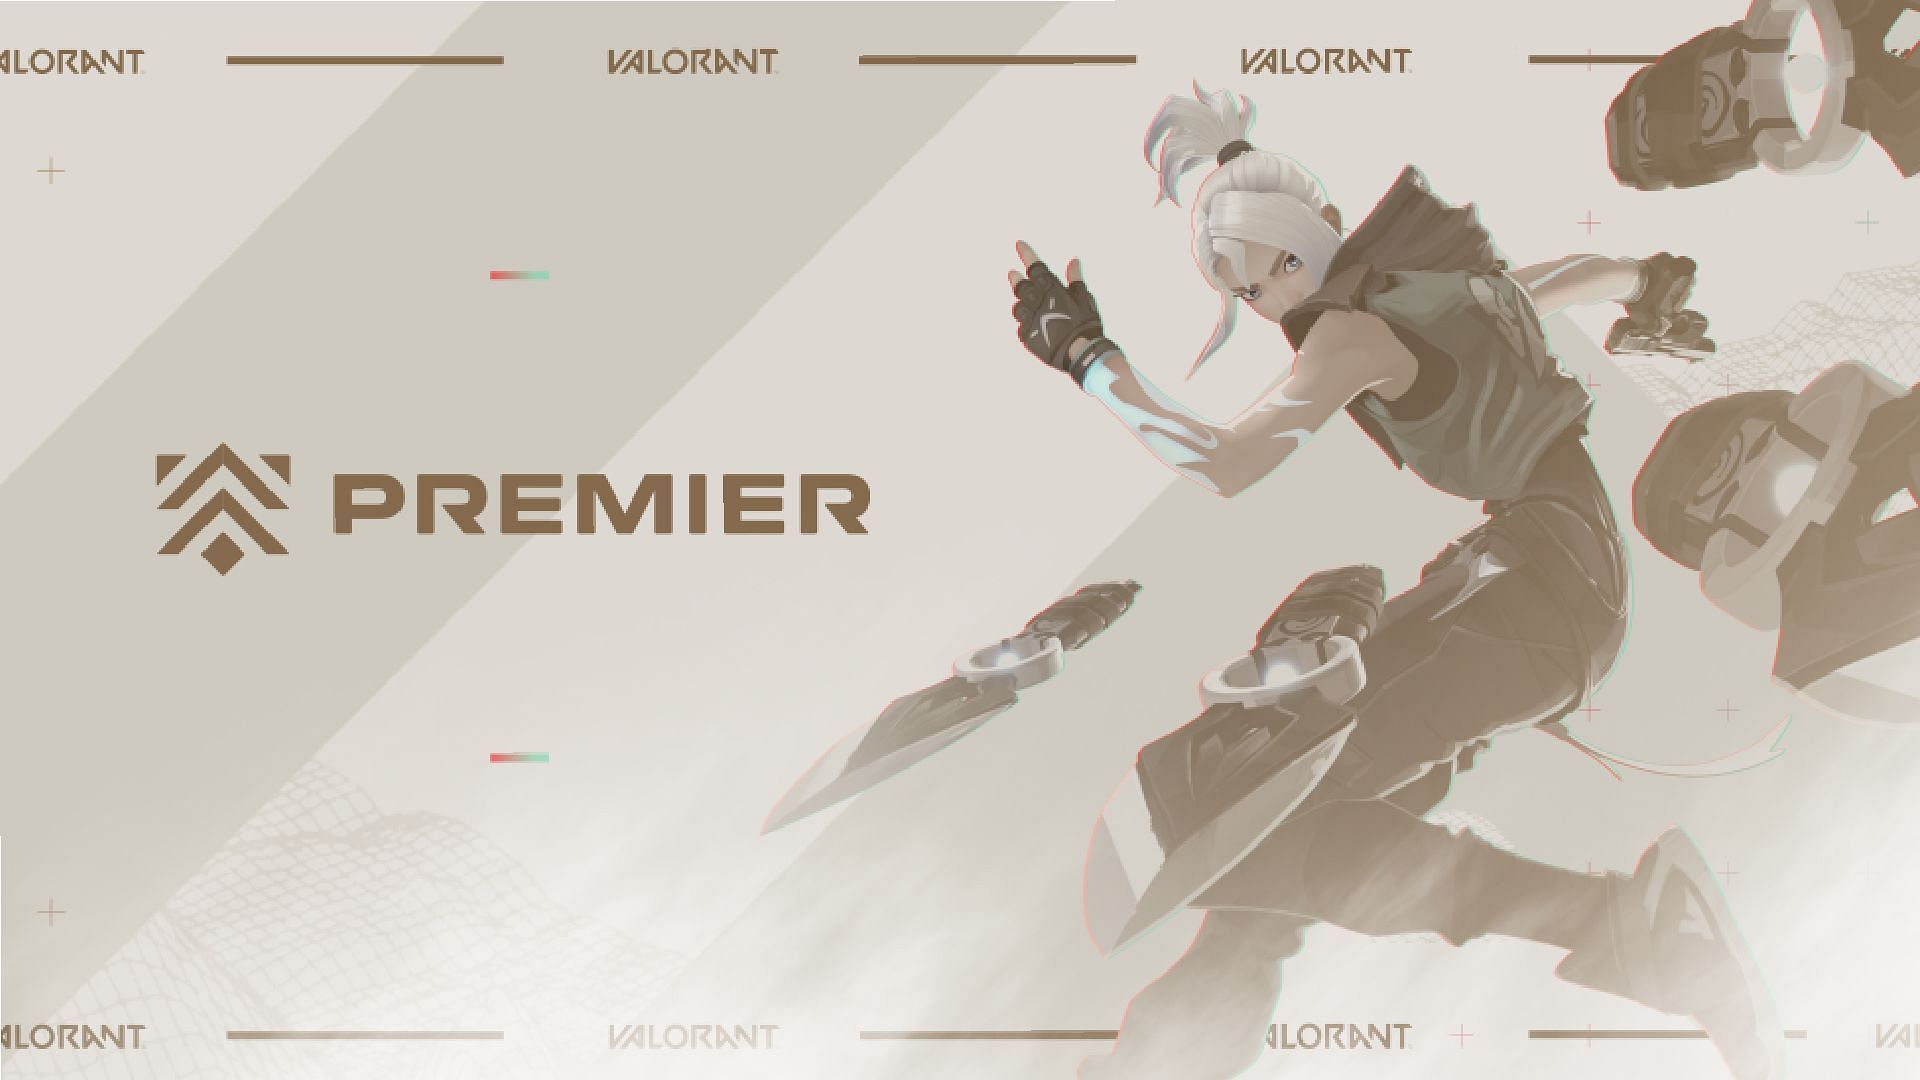 Valorant Premier Global Open Beta Start date, format, and more